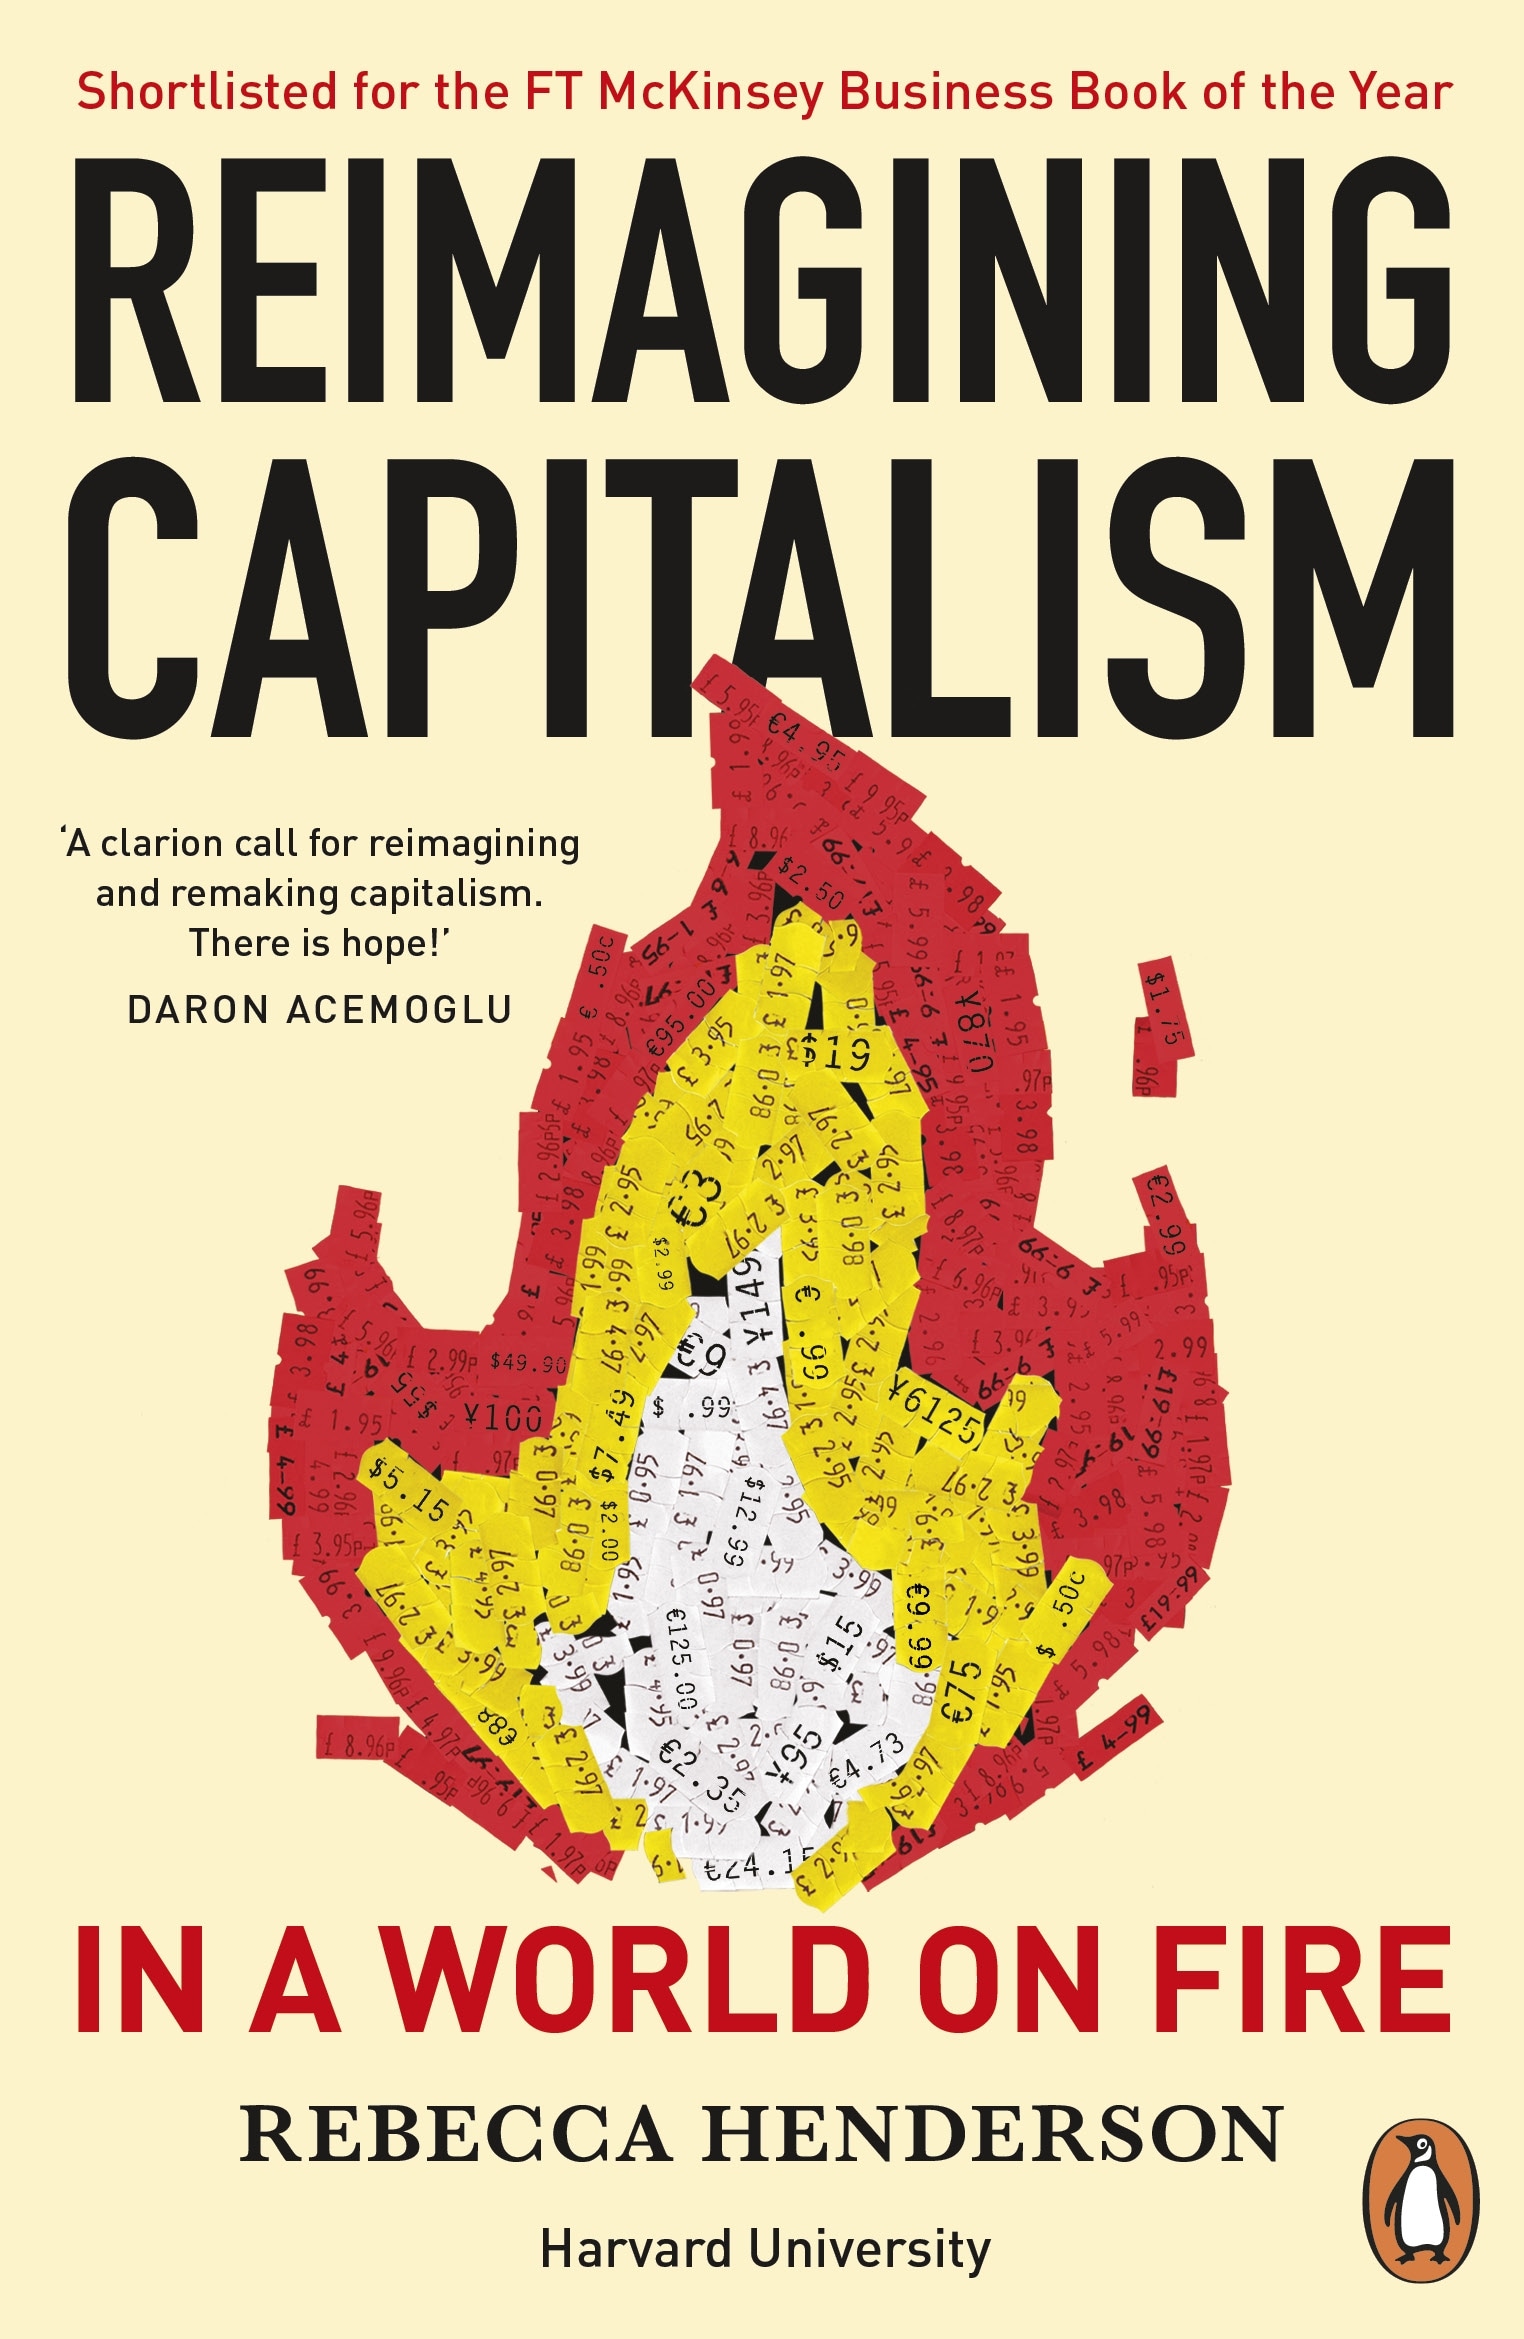 Book “Reimagining Capitalism in a World on Fire” by Rebecca Henderson — May 13, 2021